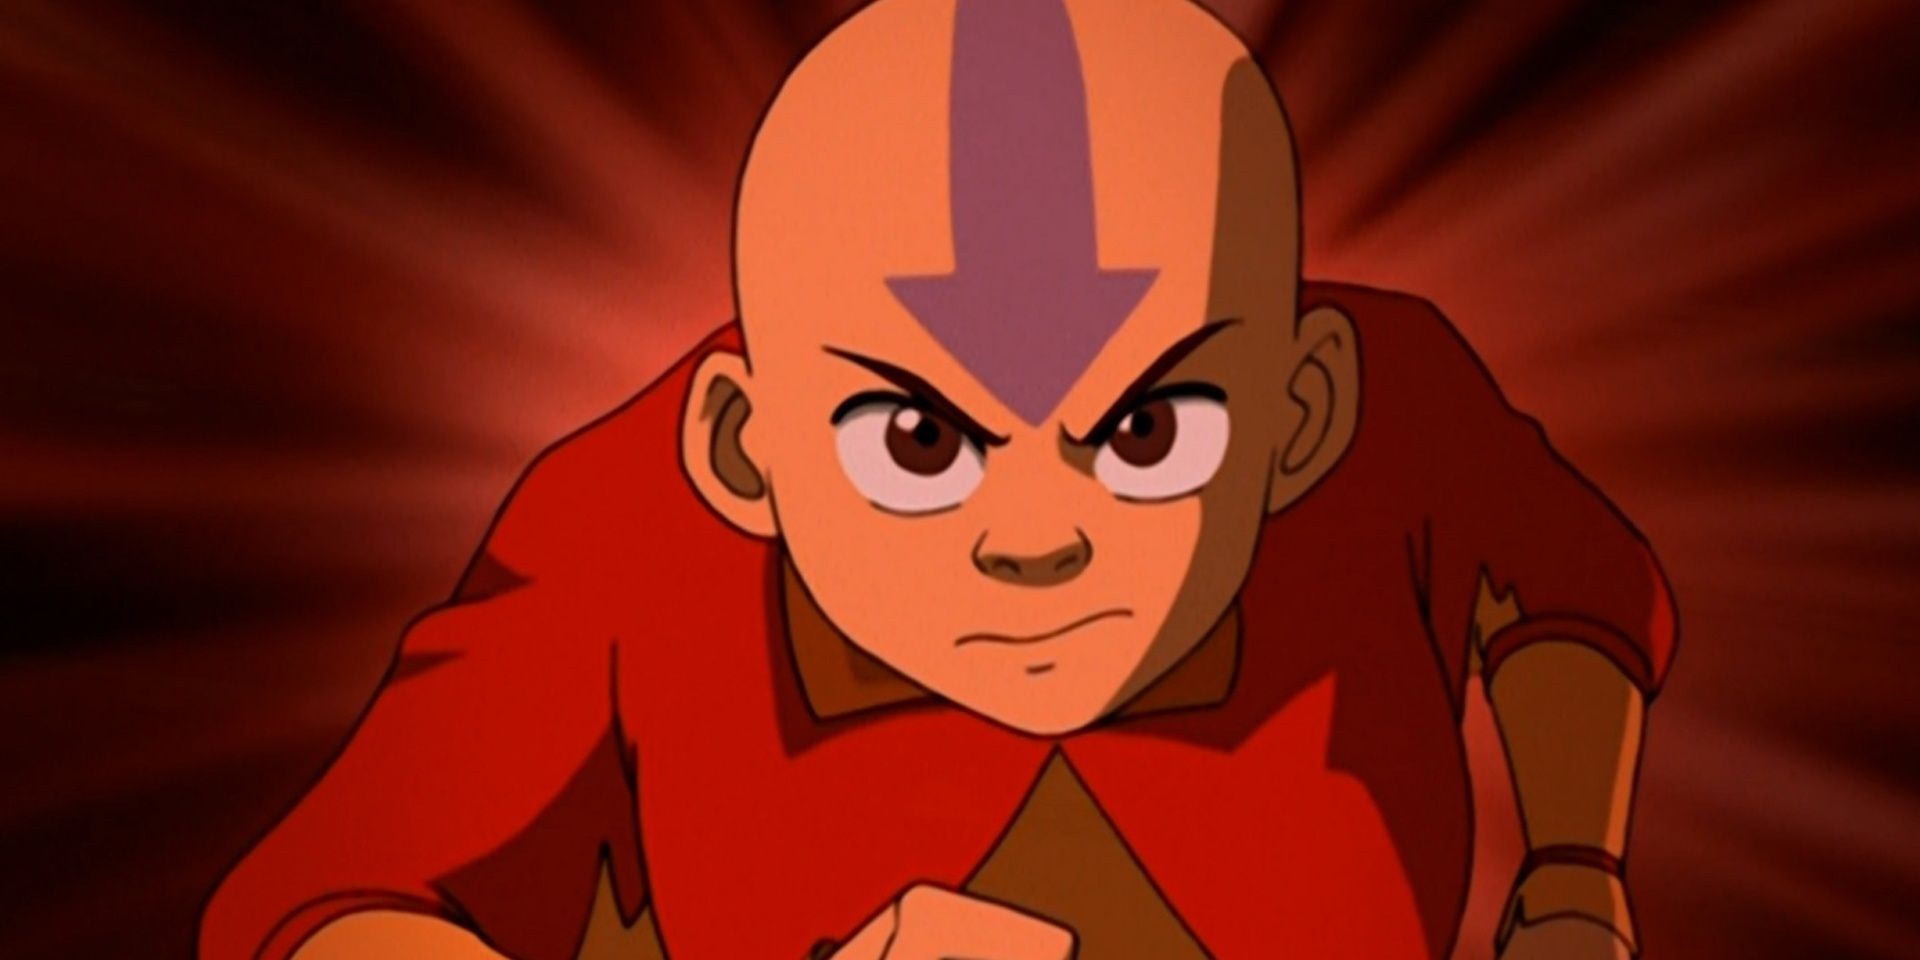 Avatar The Last Airbender – 5 Quotes That Prove Aang Is A Ravenclaw (& 5 That Disprove This)